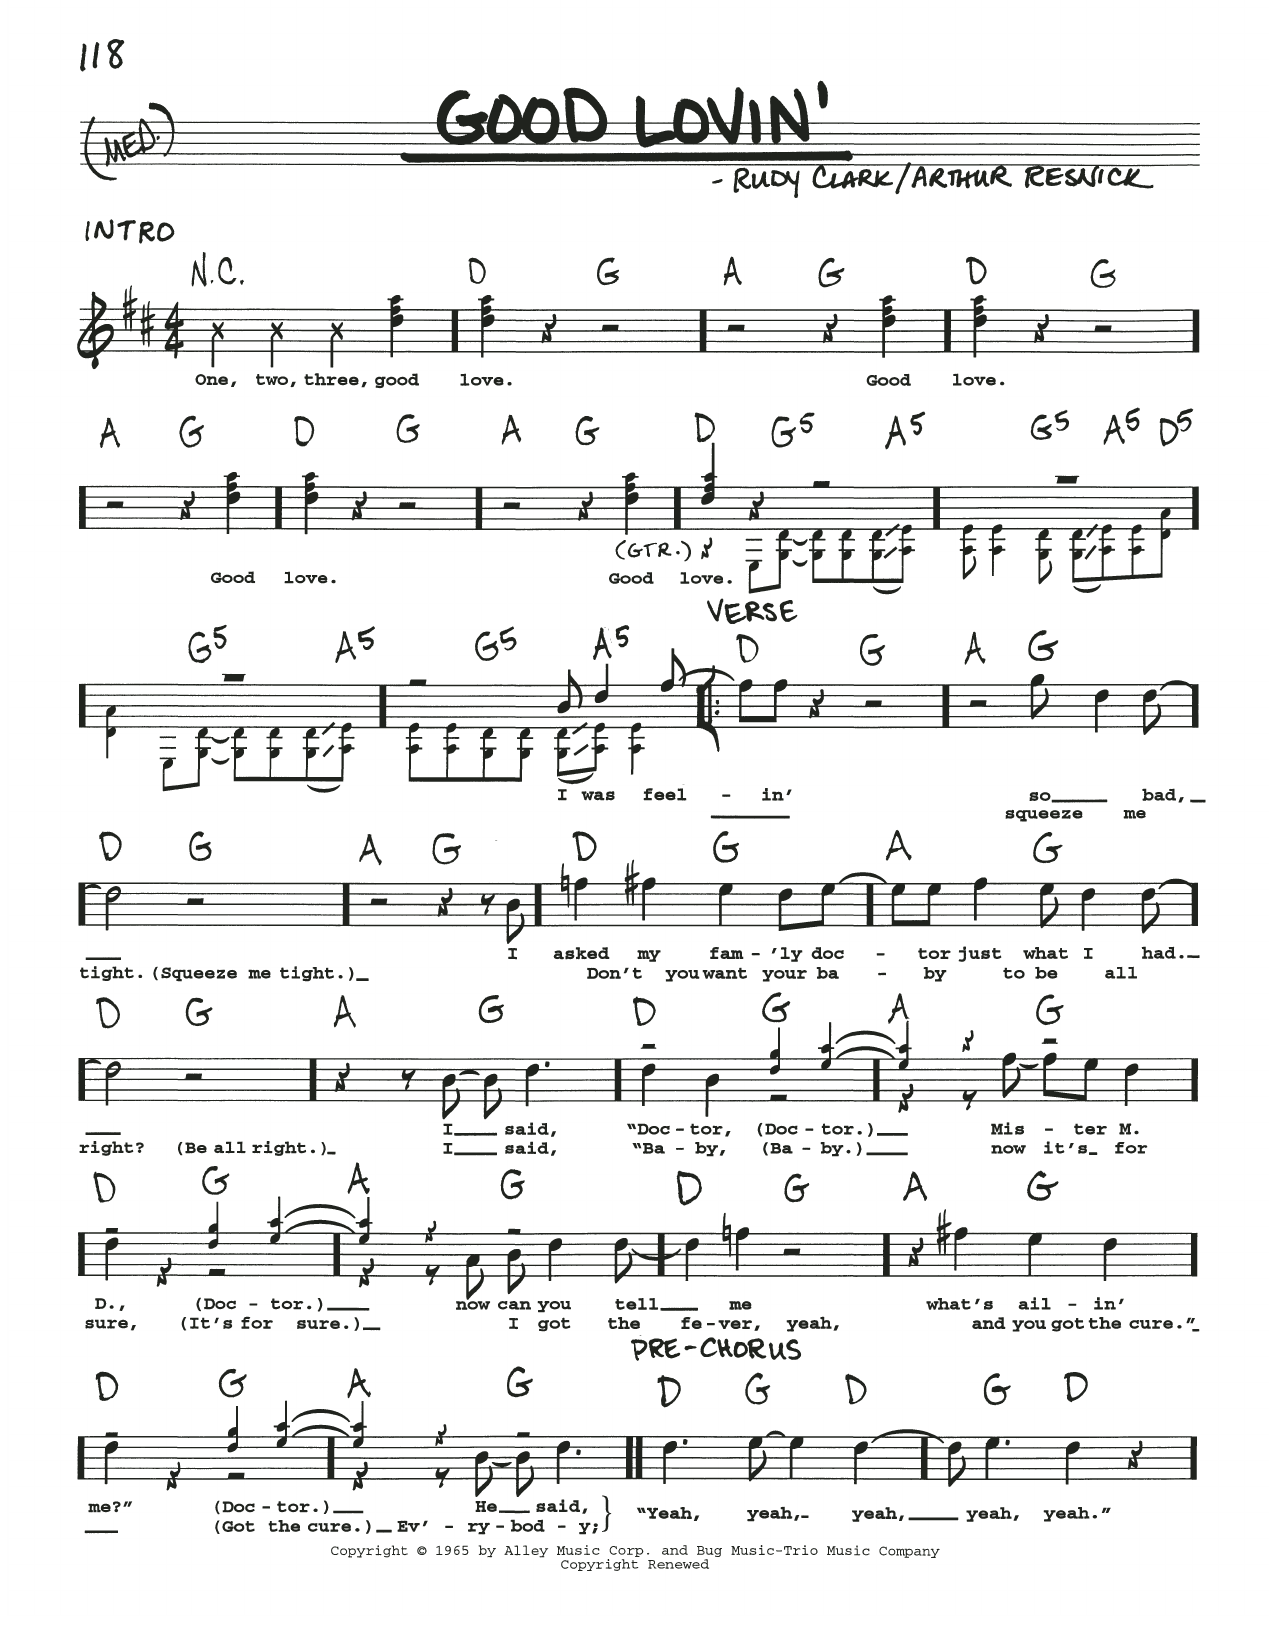 Download The Young Rascals Good Lovin' Sheet Music